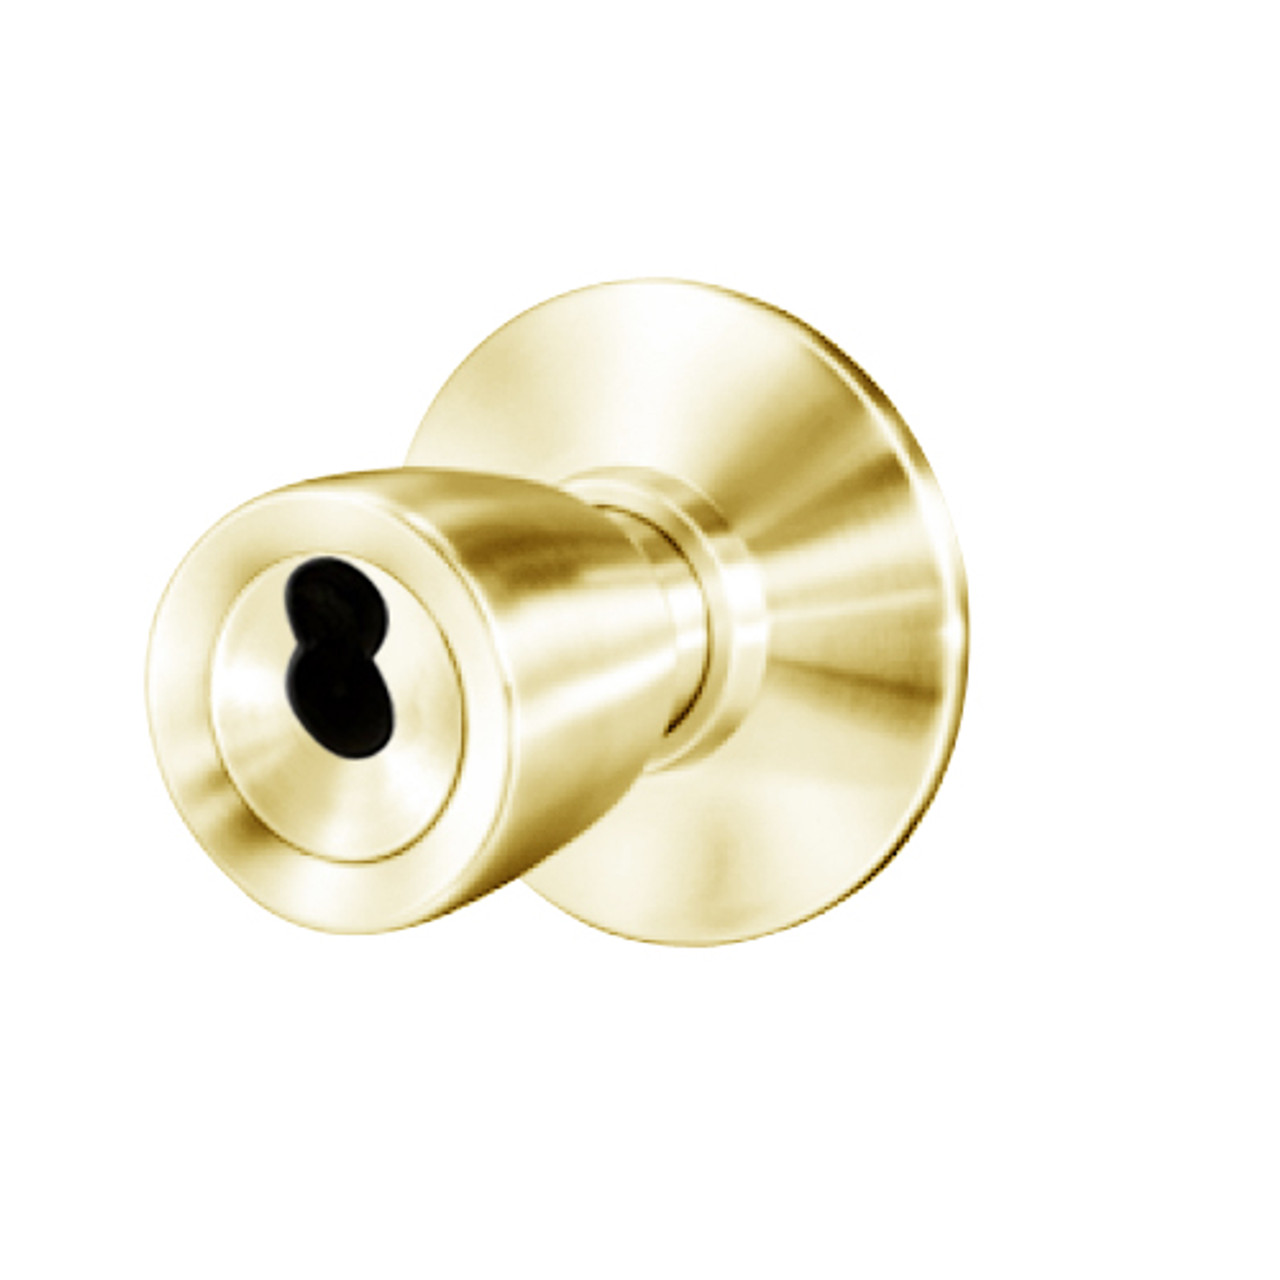 8K37YD6DS3605 Best 8K Series Exit Heavy Duty Cylindrical Knob Locks with Tulip Style in Bright Brass